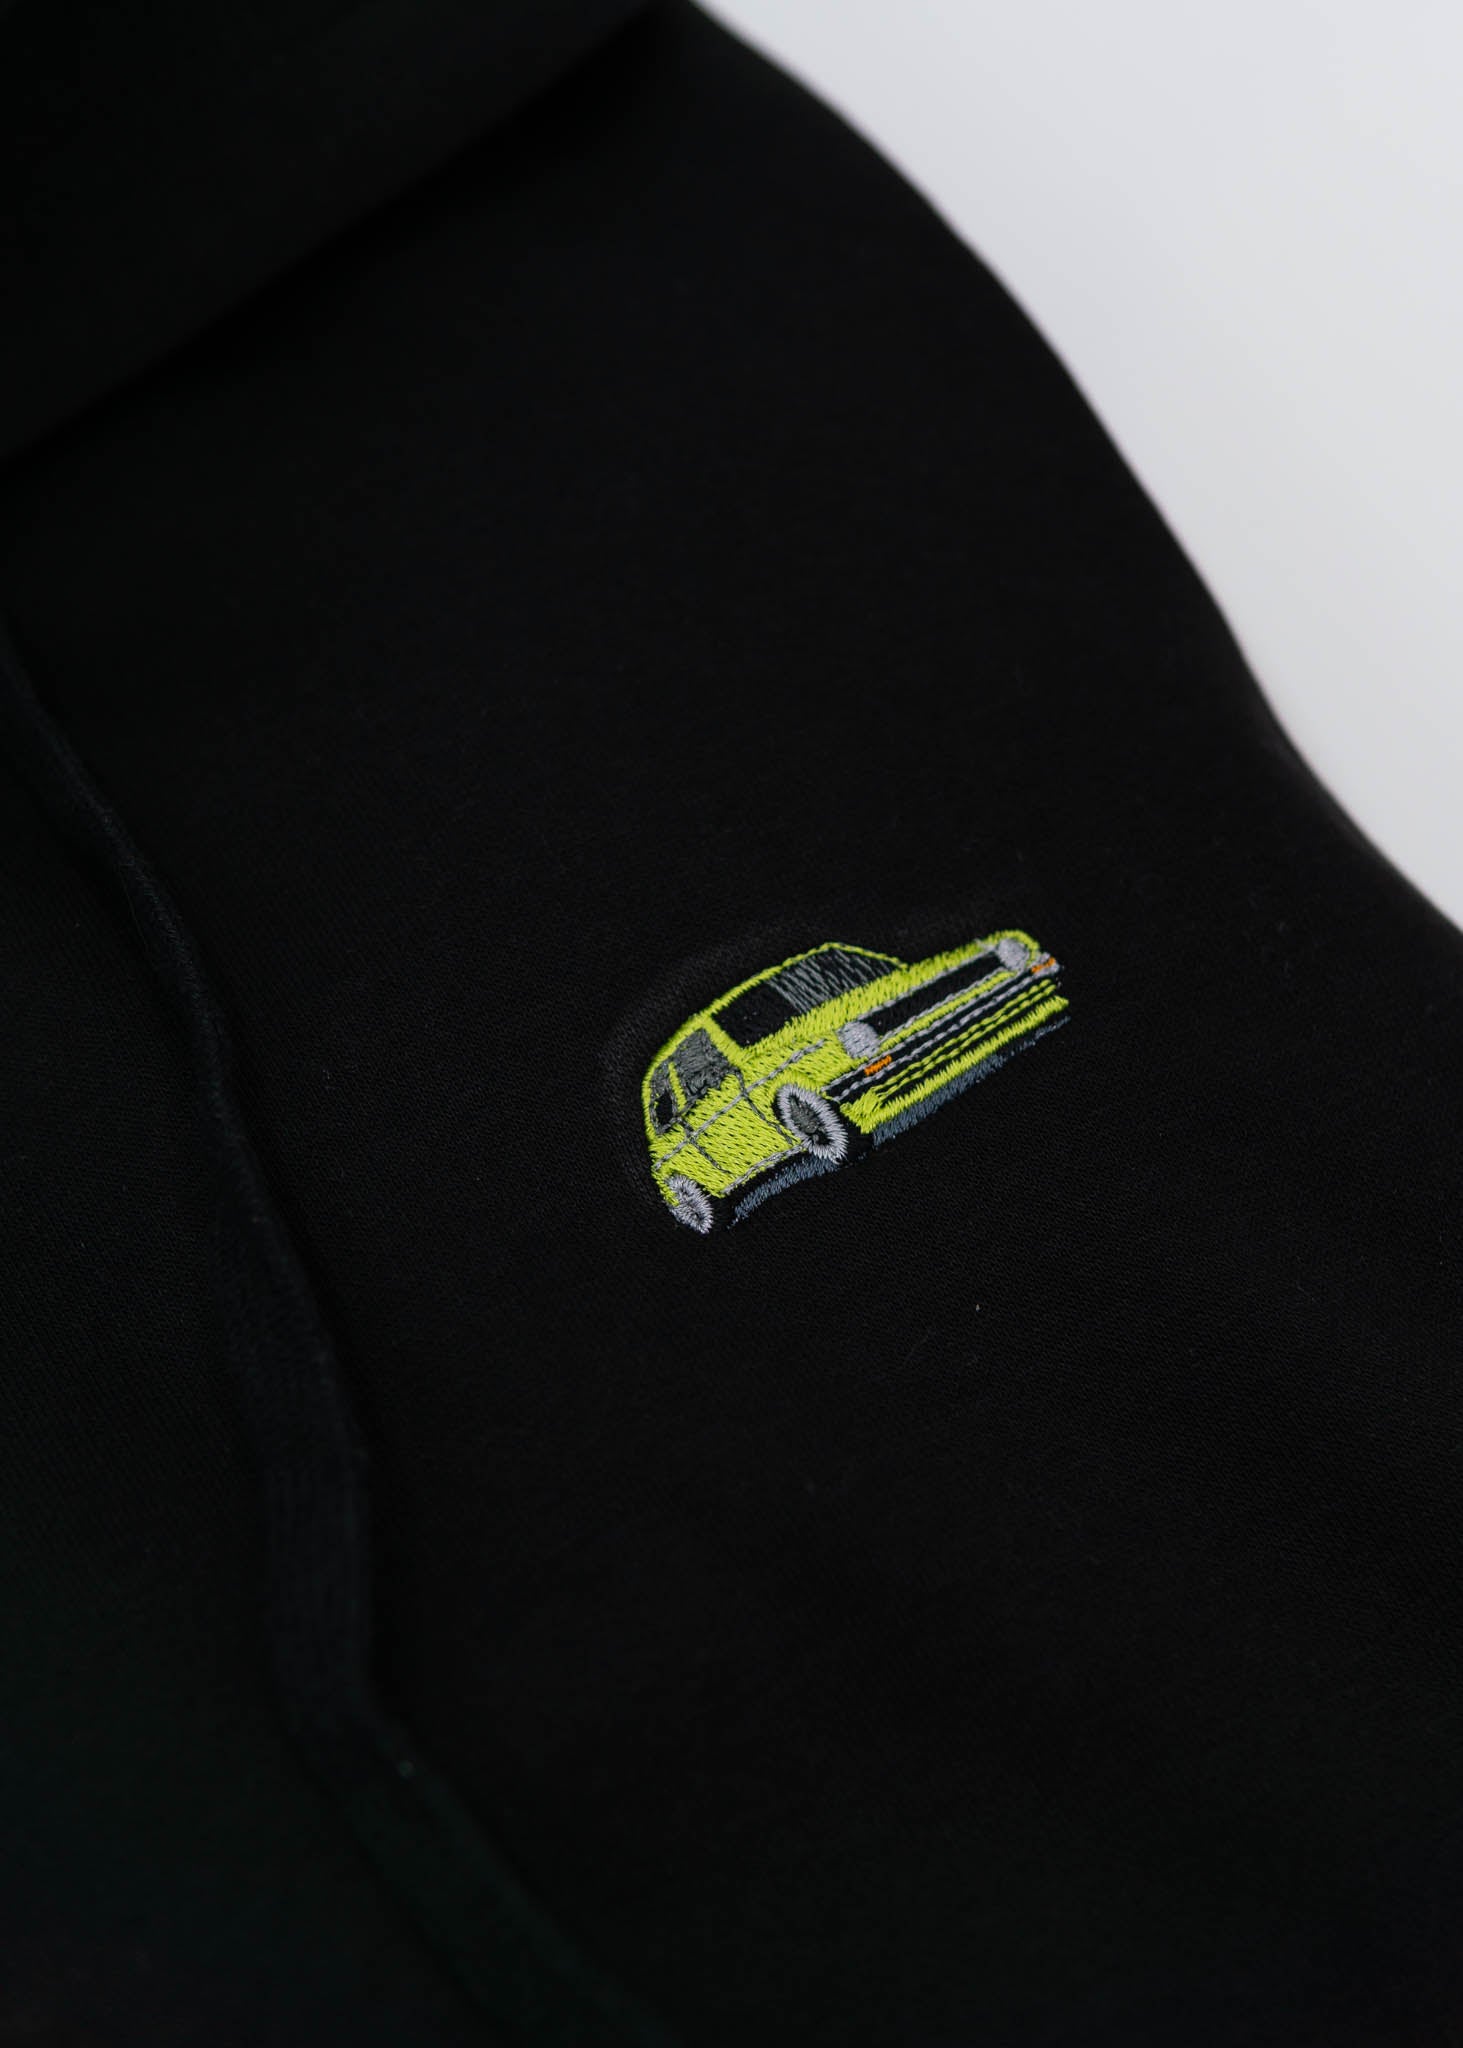 A black VW Volkswagen unisex hoodie for men and women. Photo is a close up of the sweater with an embroidered modified green Mk1 Golf. Fabric composition is cotton, polyester, and rayon. The material is very soft, stretchy, and non-transparent. The style of this hoodie is long sleeve, crewneck with a hood, hooded, with embroidery on the left chest.